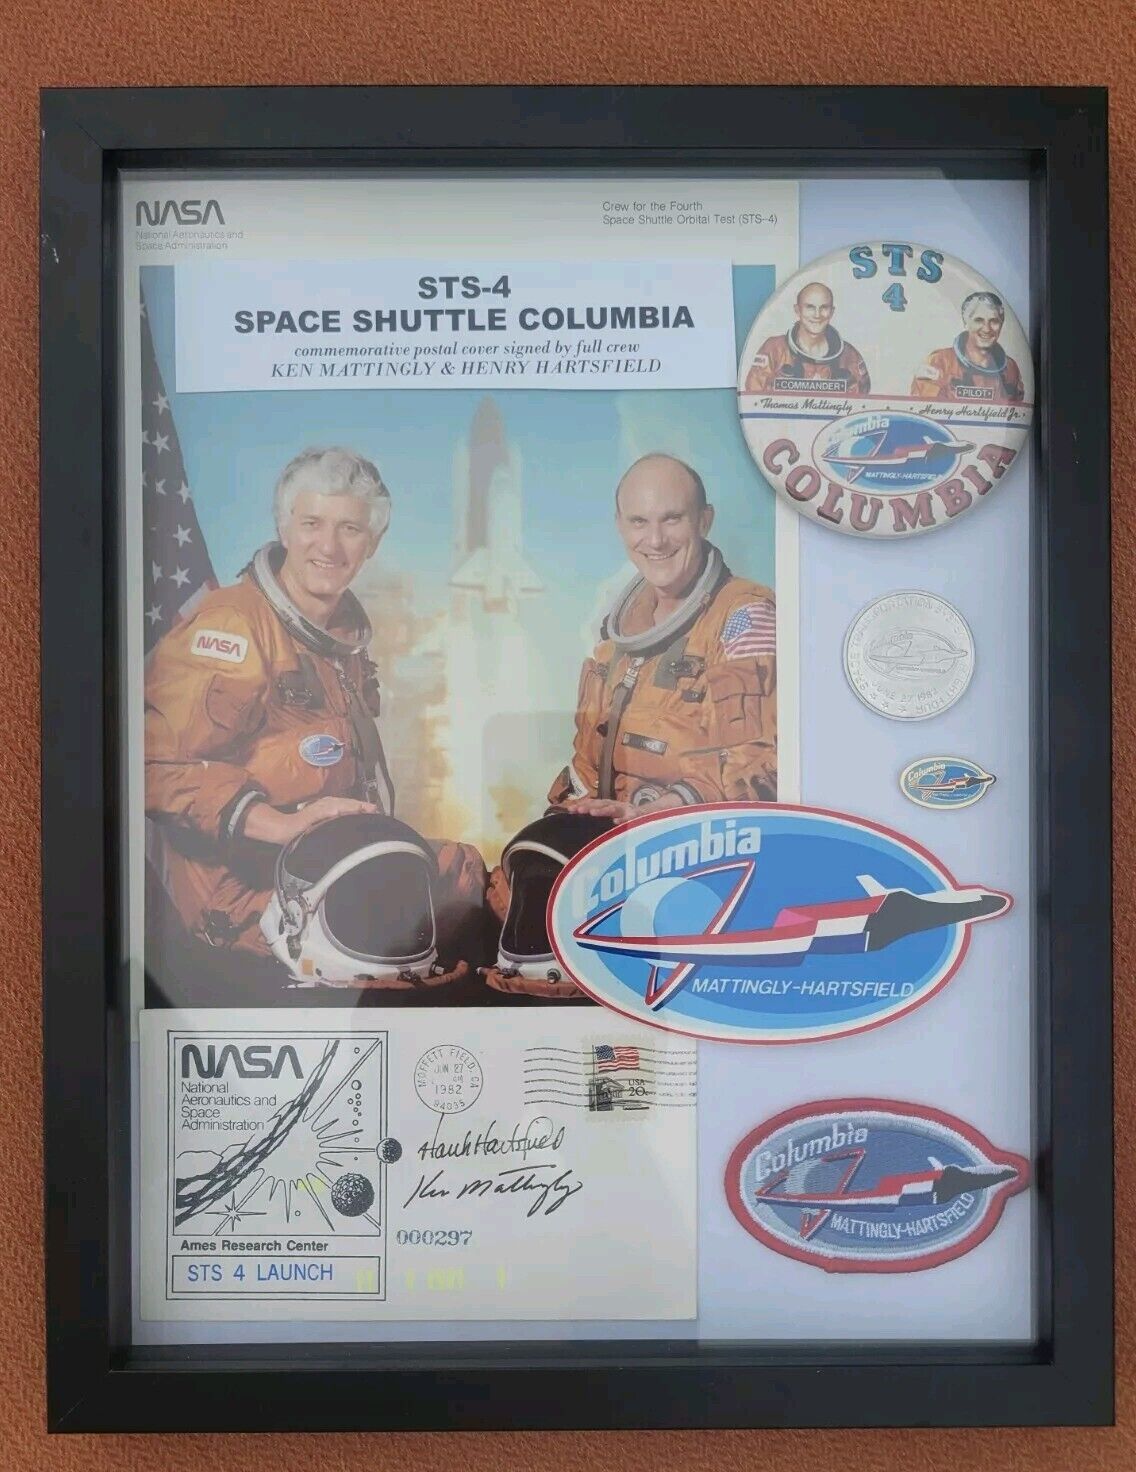 STS-4 Full Crew Signed Mission Cover Display with HARTSFIELD & MATTINGLY CERT